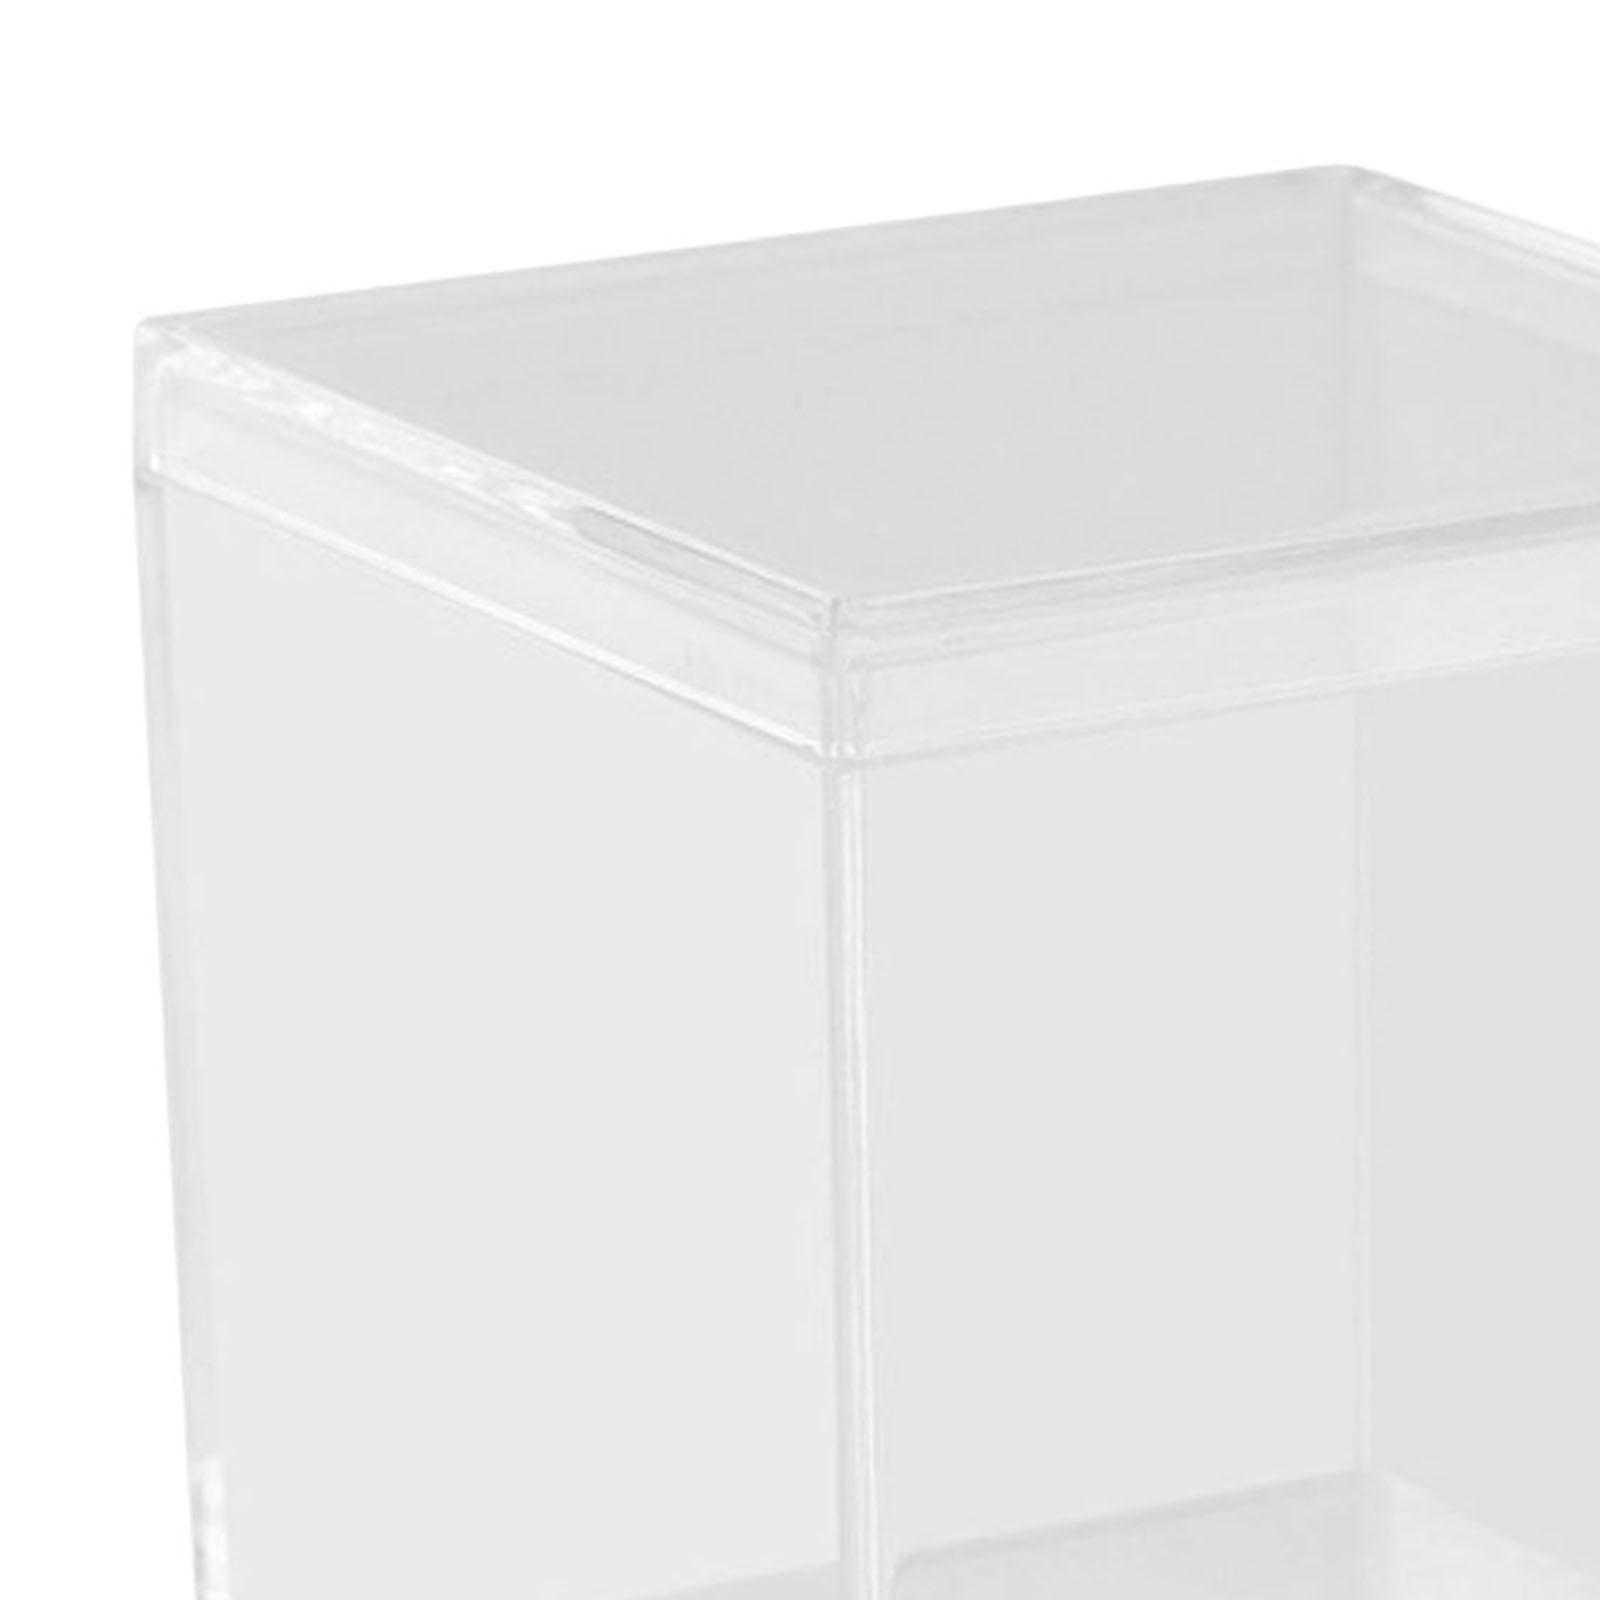 Clear Boxes, Favor ,2x2x2 Inch, Small Storage Bins, Boxed Containers,  Wedding, Party, Birthday Present, Candy, Cookie, Cupcake, 